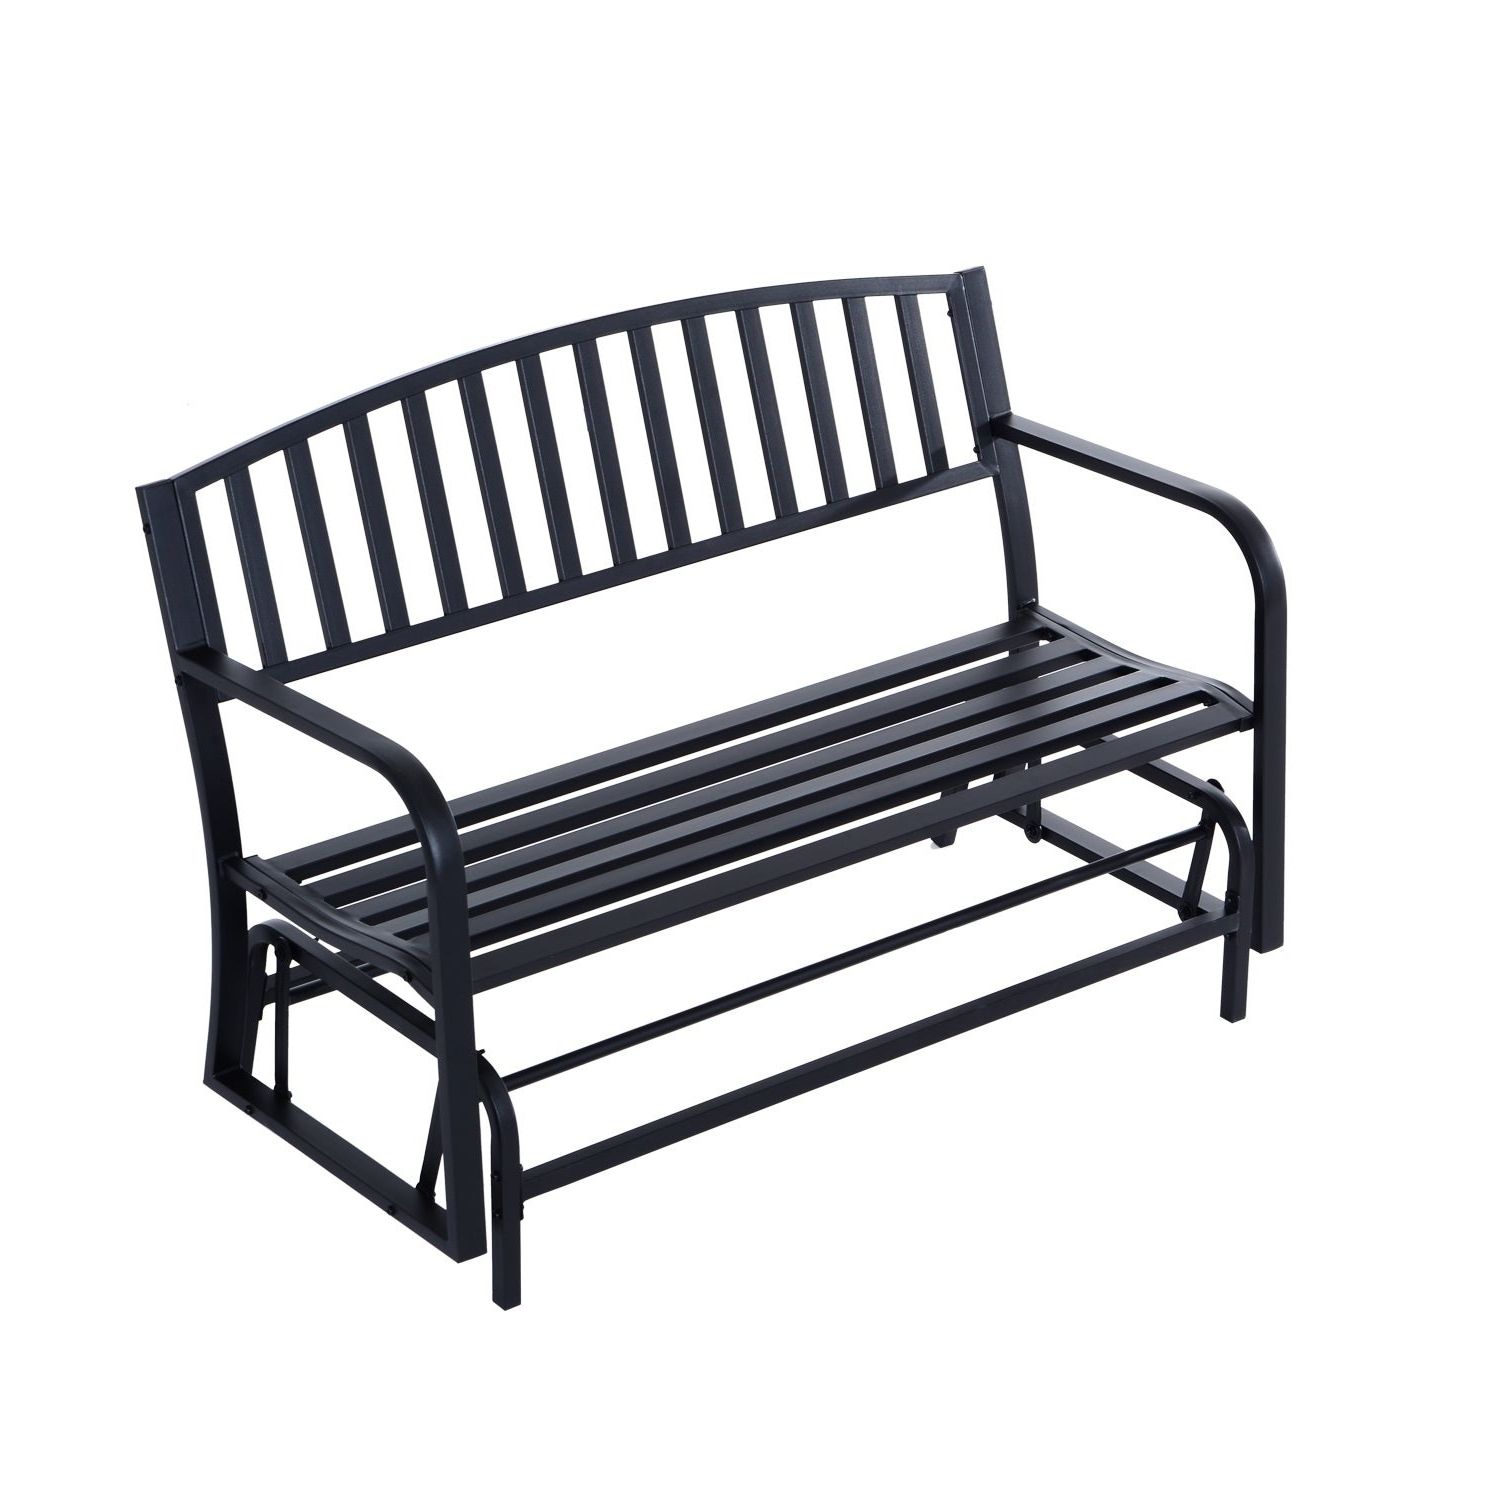 Favorite Outsunny 50 Inch Outdoor Steel Patio Swing Glider Bench – Black For 1 Person Antique Black Steel Outdoor Gliders (View 4 of 30)